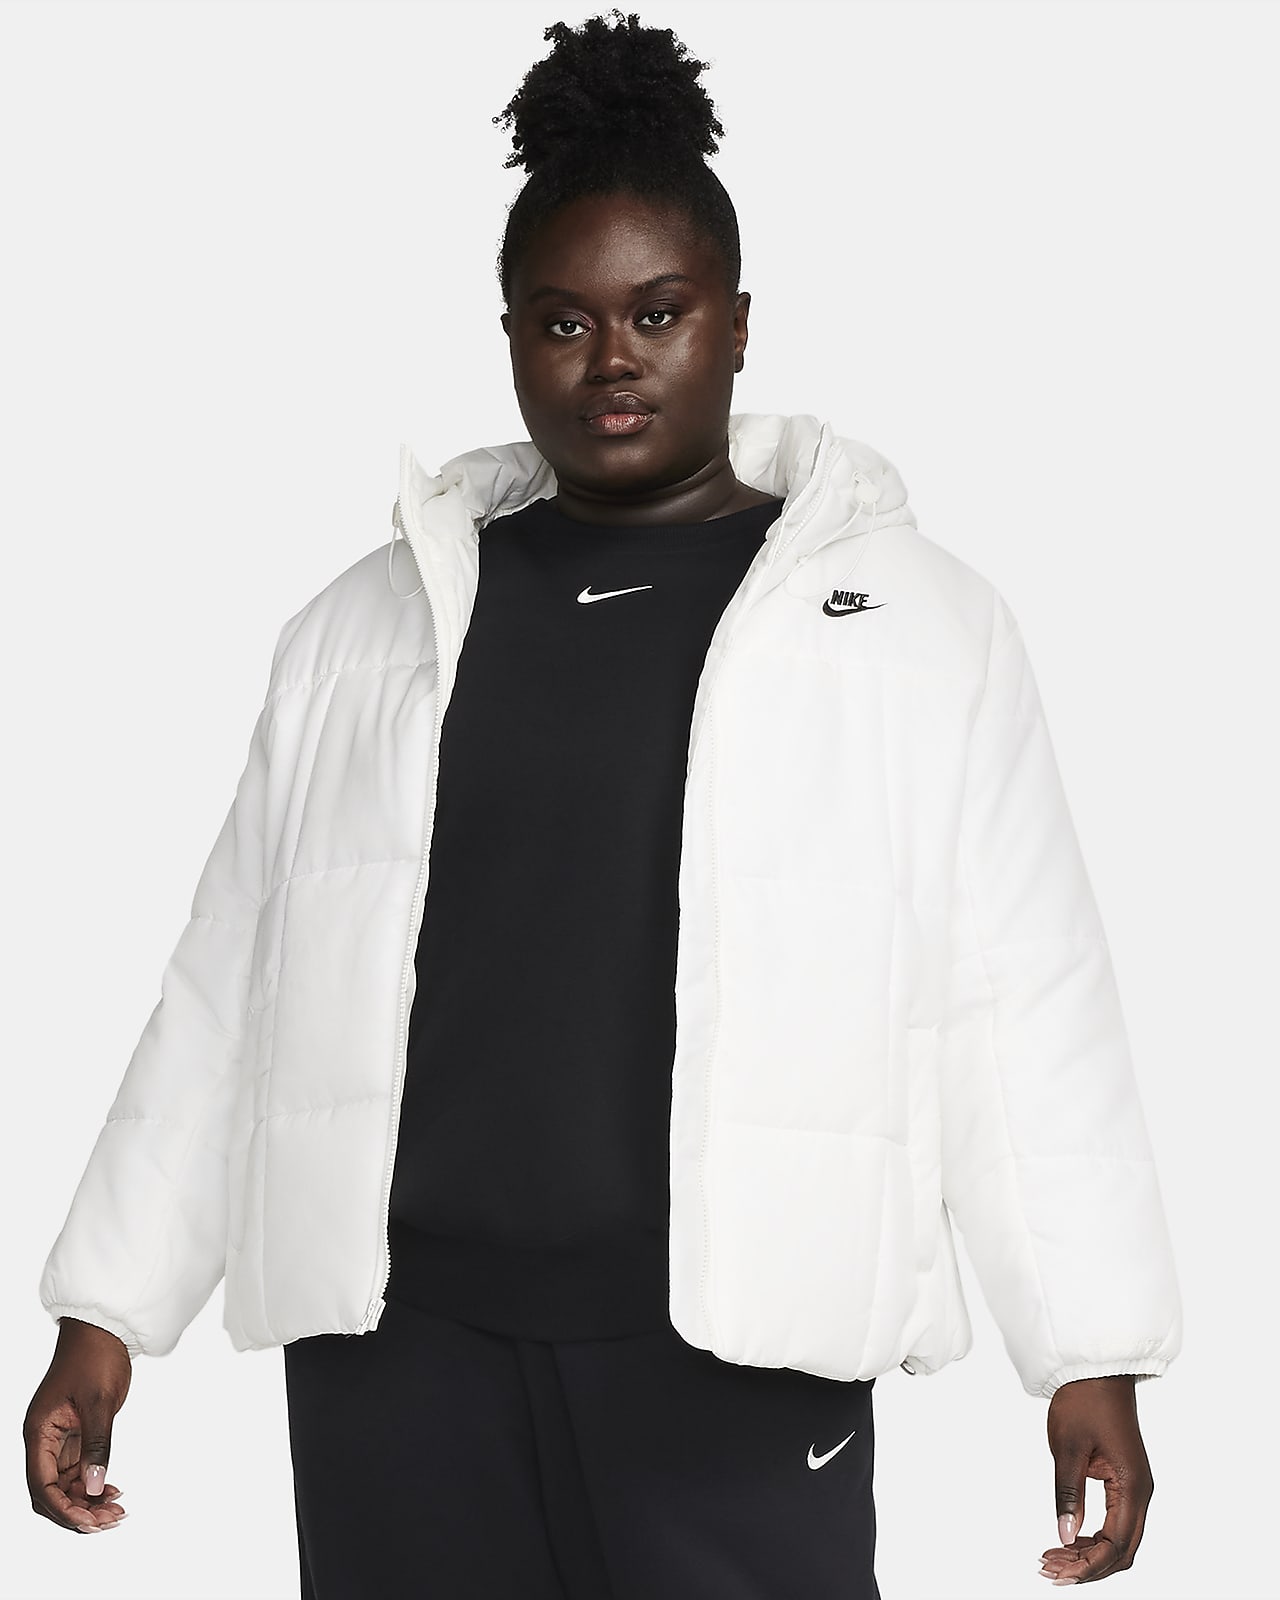 Doudoune Therma-FIT Nike Sportswear Essential pour femme (grande taille)